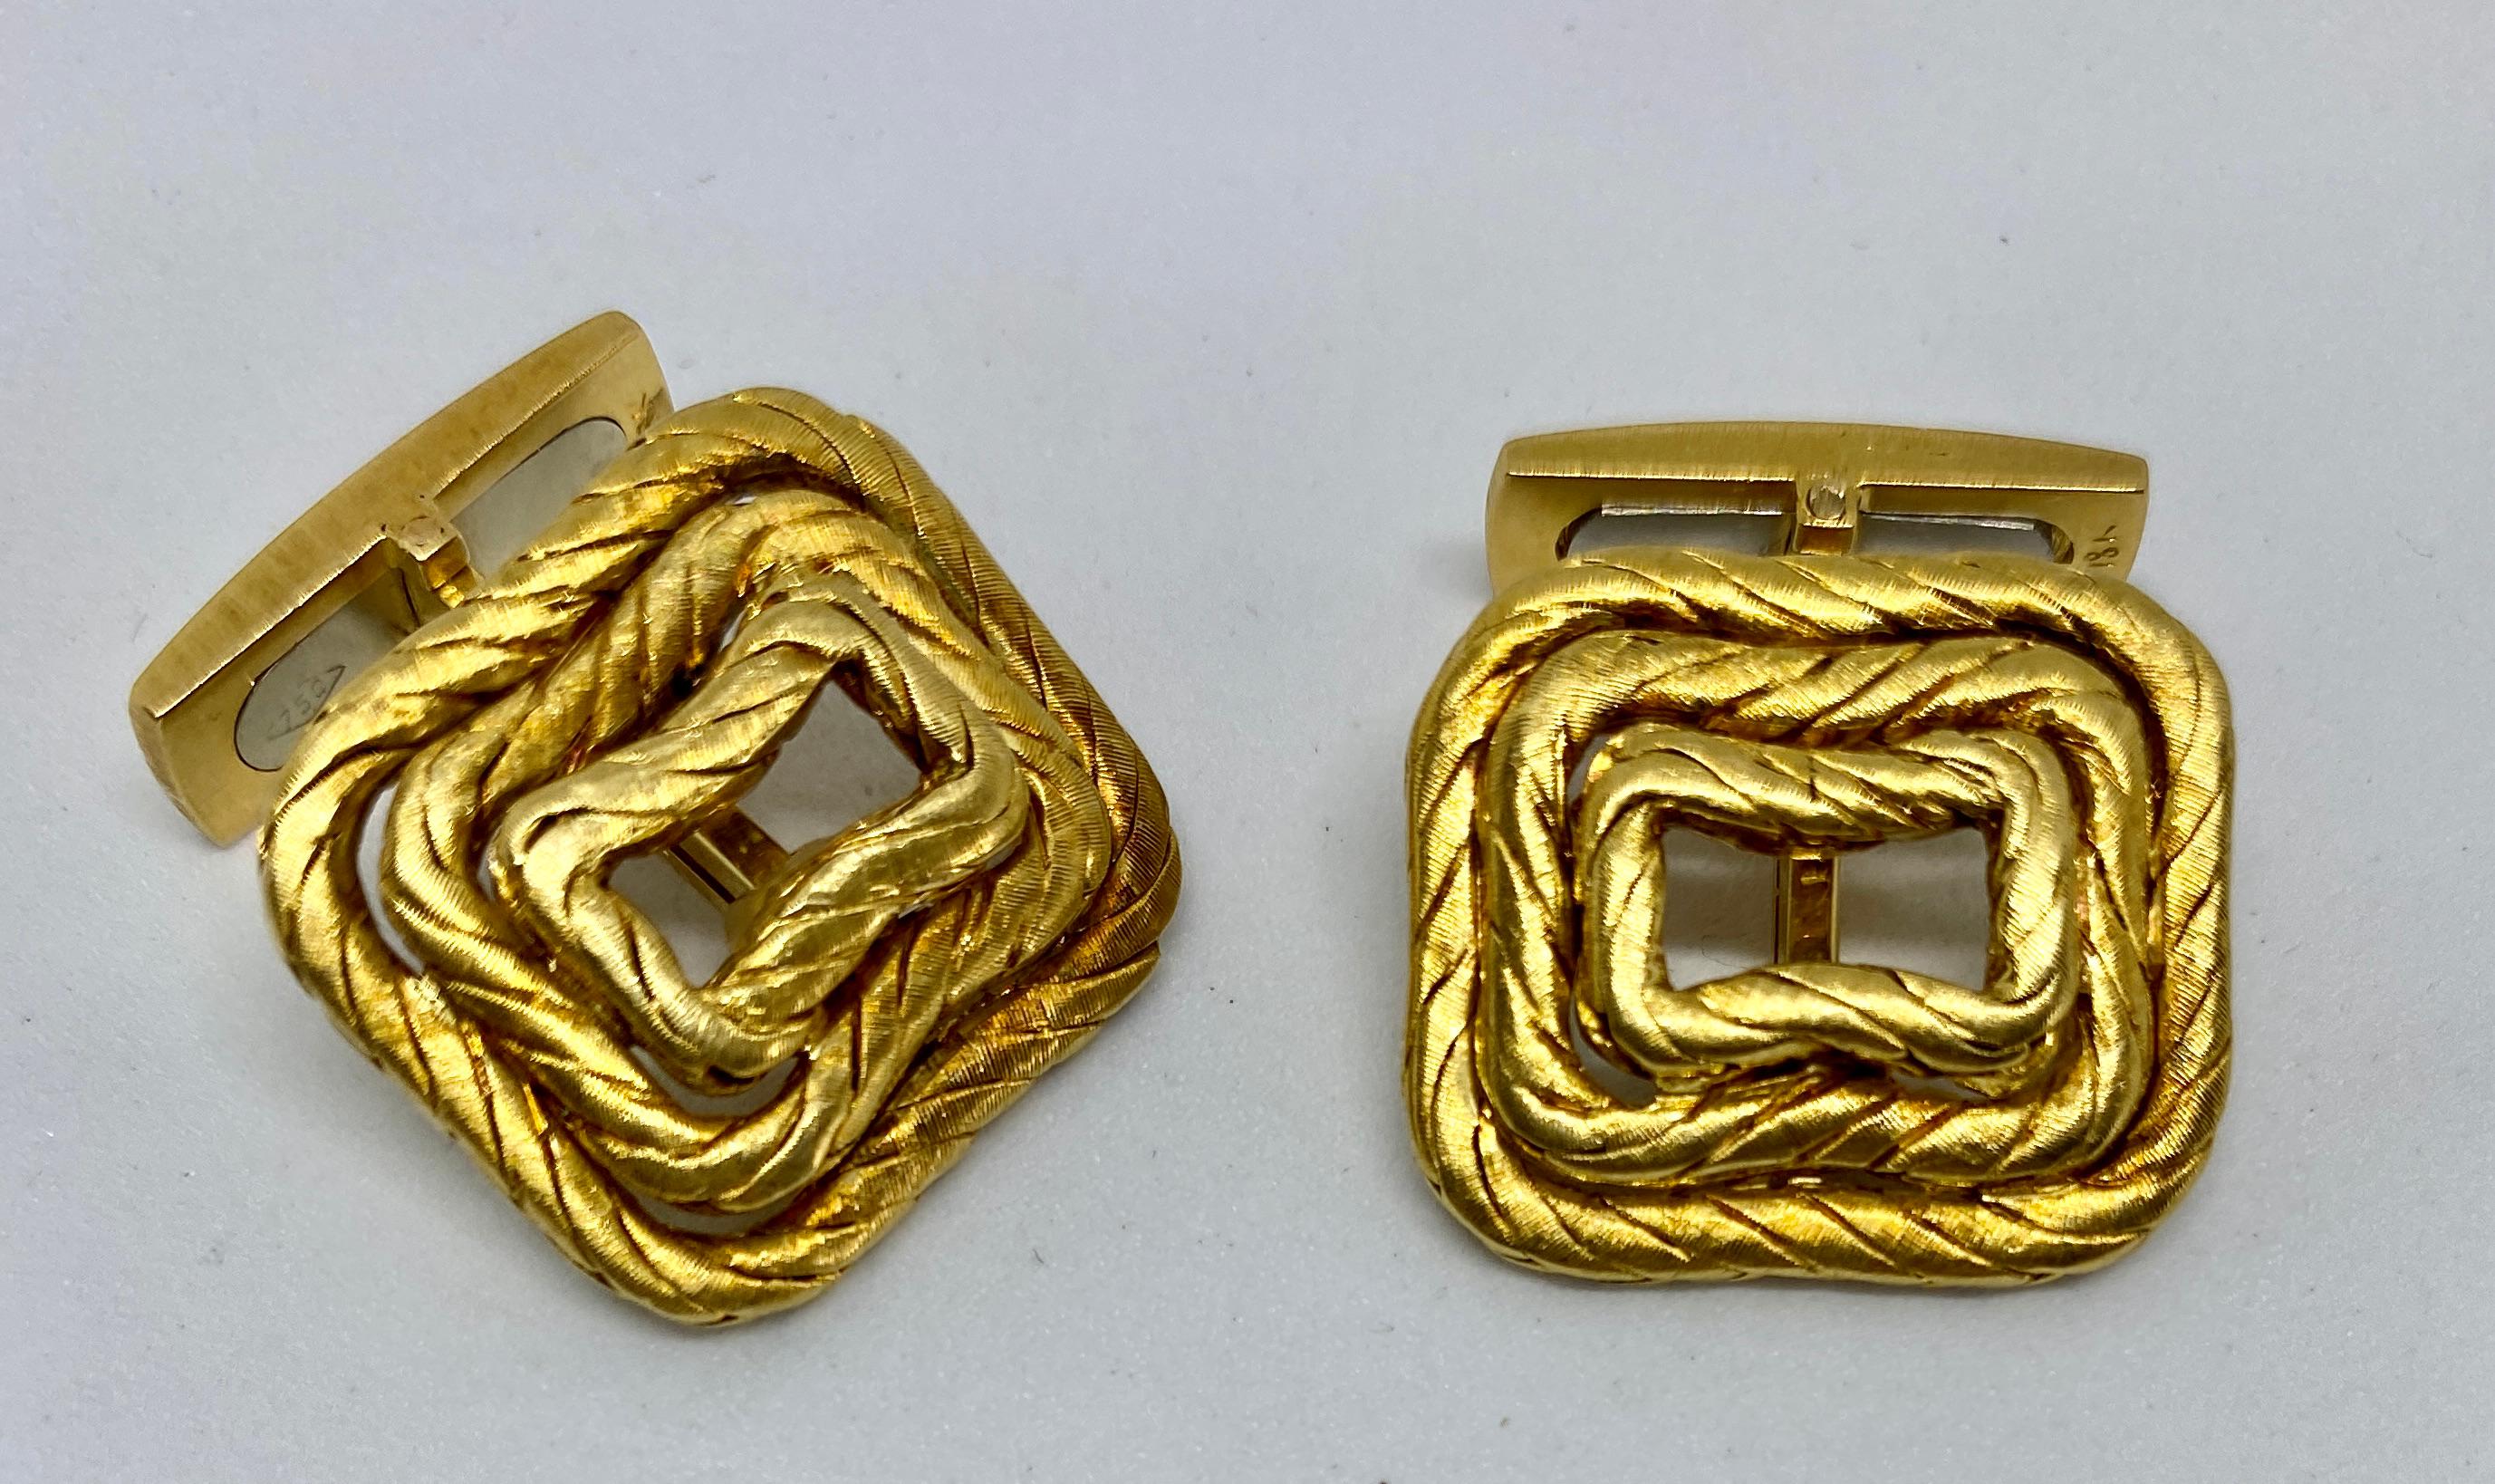 A pair of vintage, 18K yellow gold cufflinks that manage to balance subtle design with the unmistakable style and unparalleled workmanship of Buccellati.

Displaying two techniques for which Buccellati is known - gold weaving and 